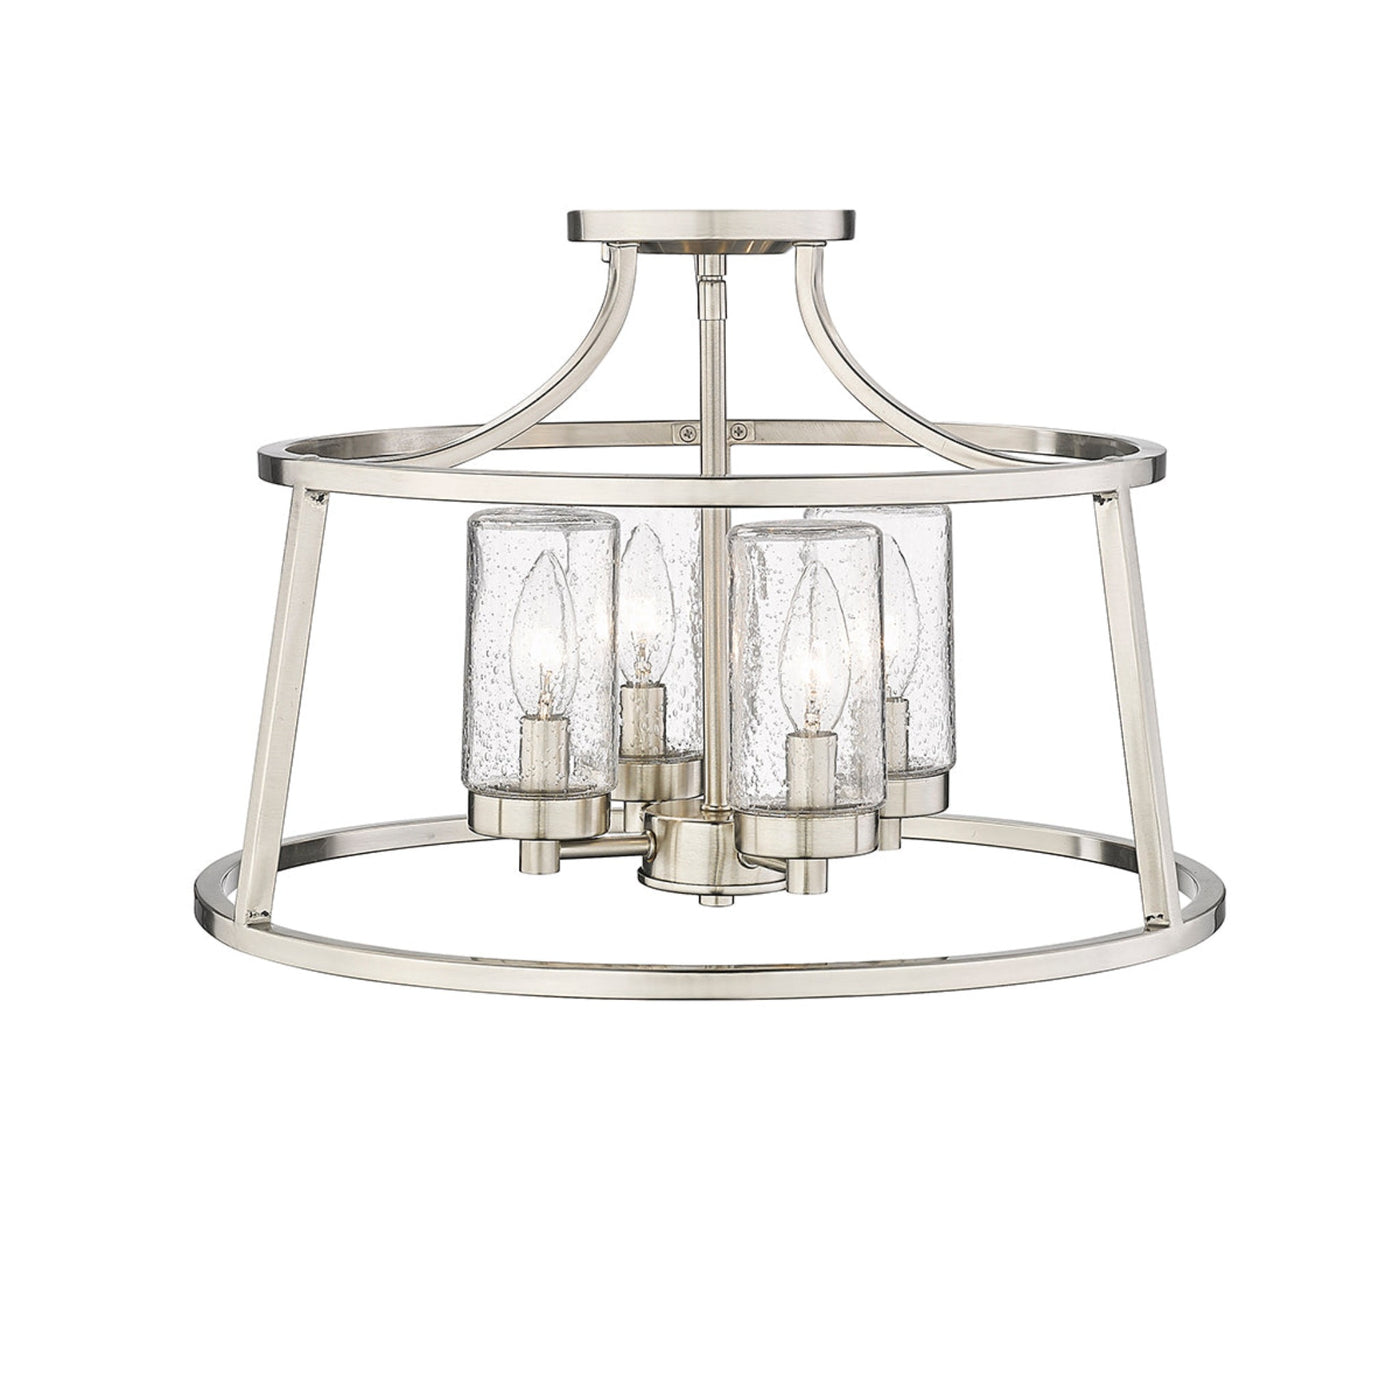 Millennium Lighting Four Light Semi Flush Mount Ceiling Light, Errol Collection, (Available in Brushed Nickel or Matte Black Finish)